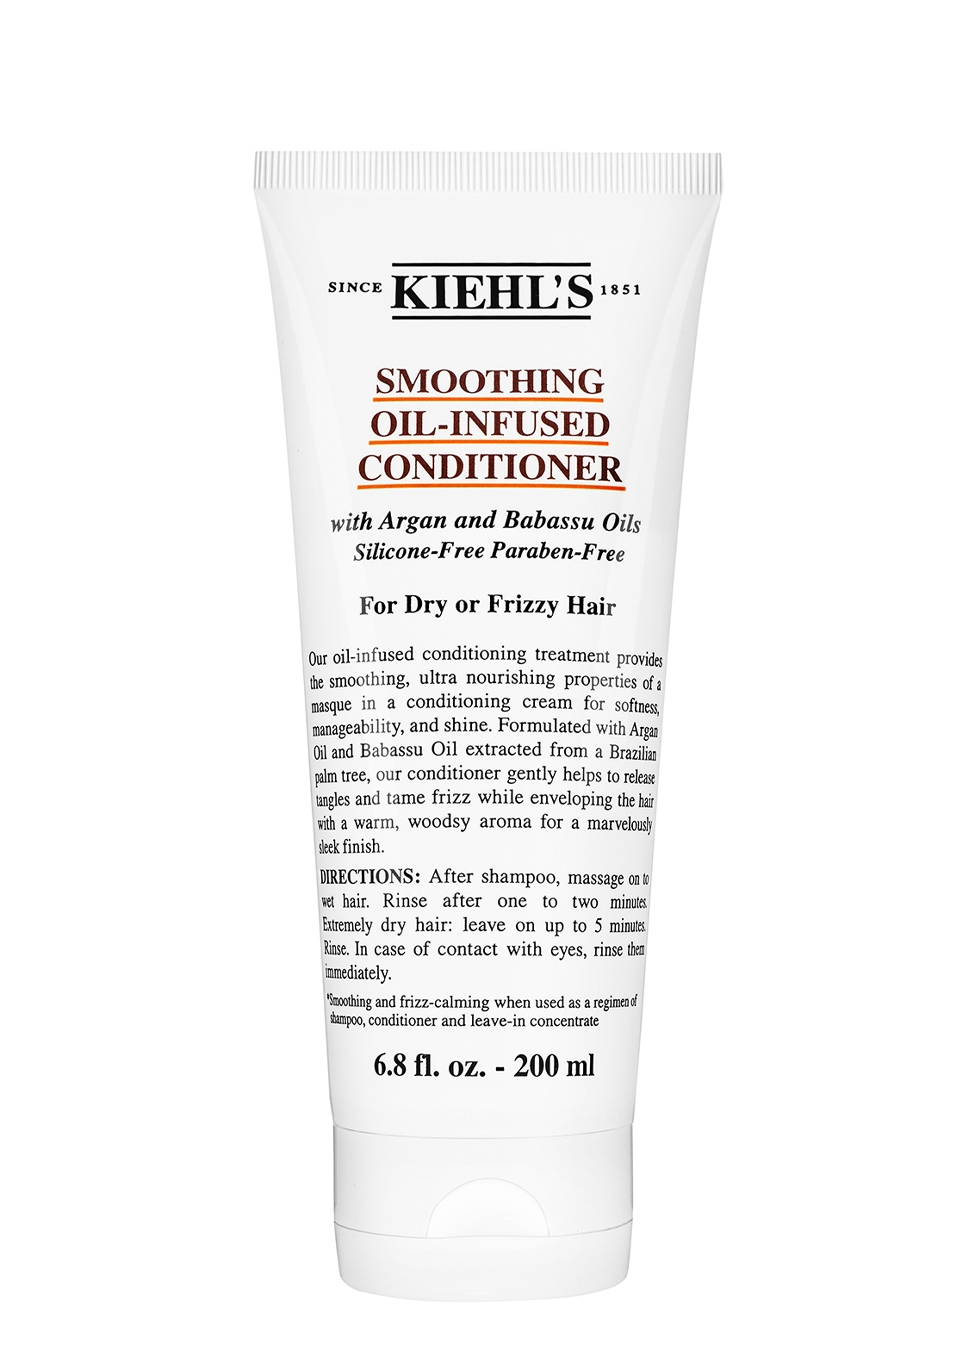 Smoothing Oil-Infused Conditioner 200ml